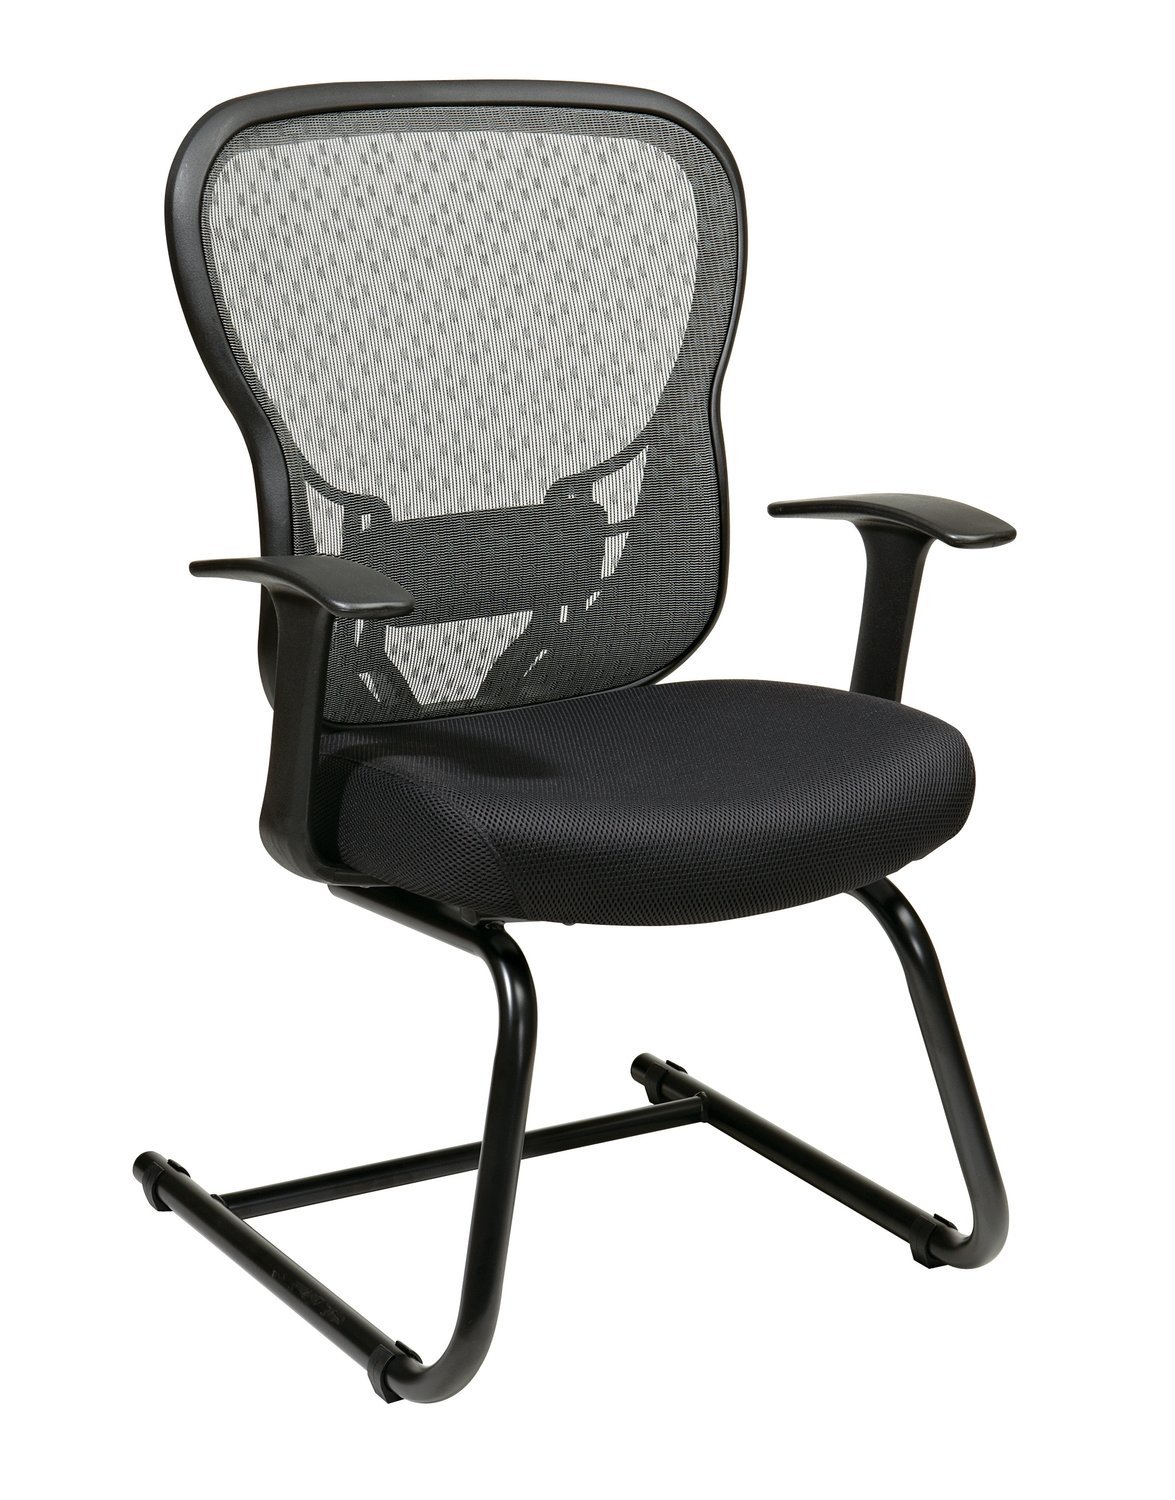 DELUXE R2 SPACEGRID BACK VISITORS CHAIR